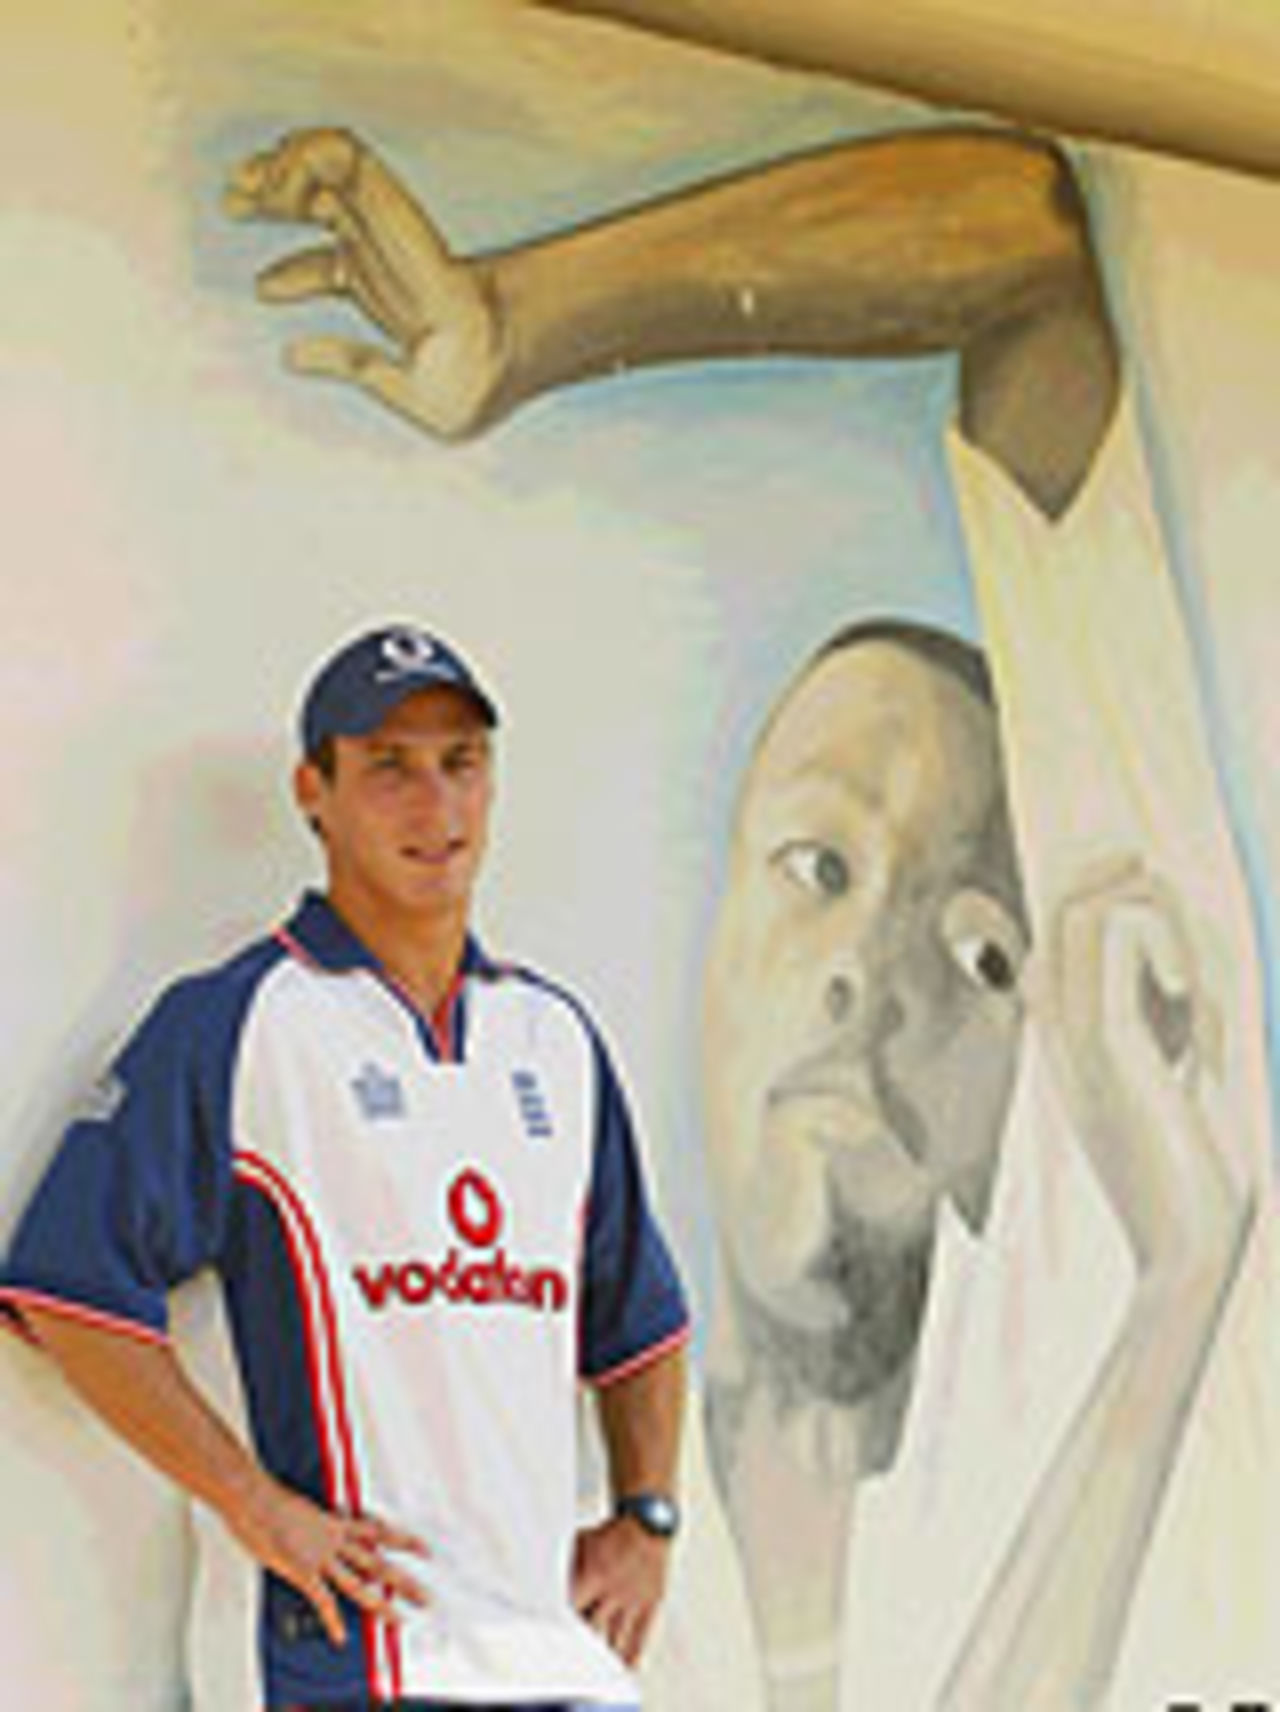 Simon Jones poses in front of a mural of Courtney Walsh, Jamaica, March 4, 2004